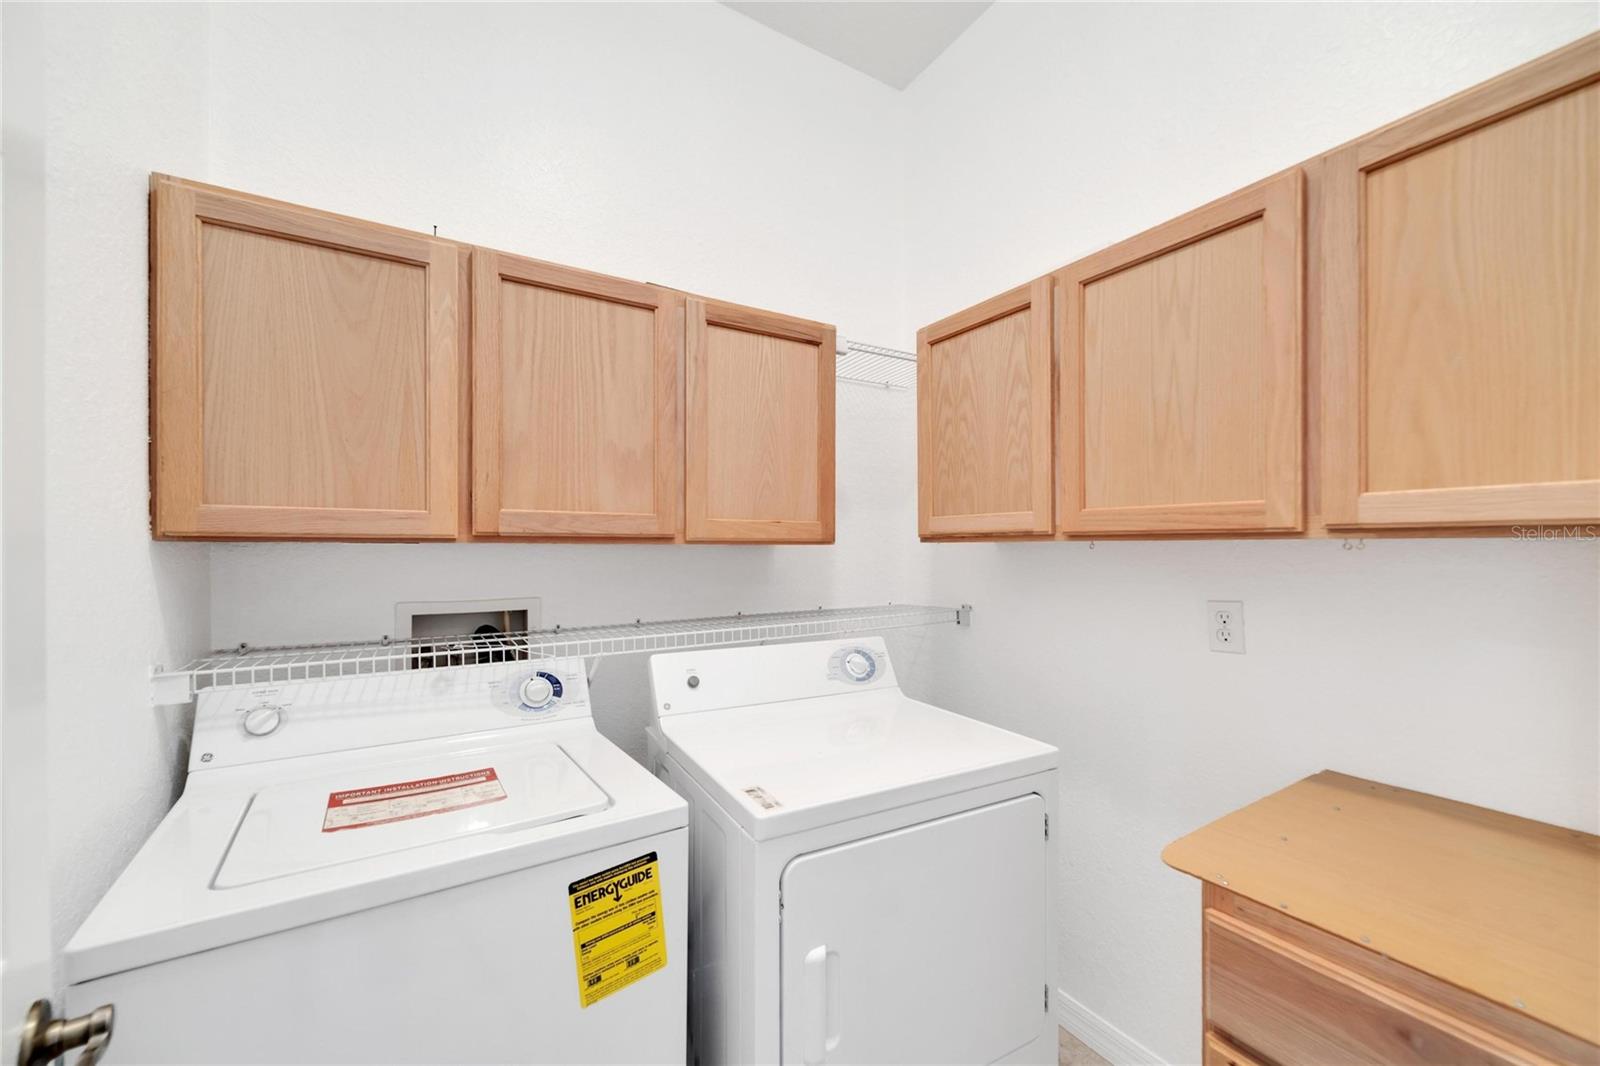 A large laundry room with extra cabinetry is a nice bonus